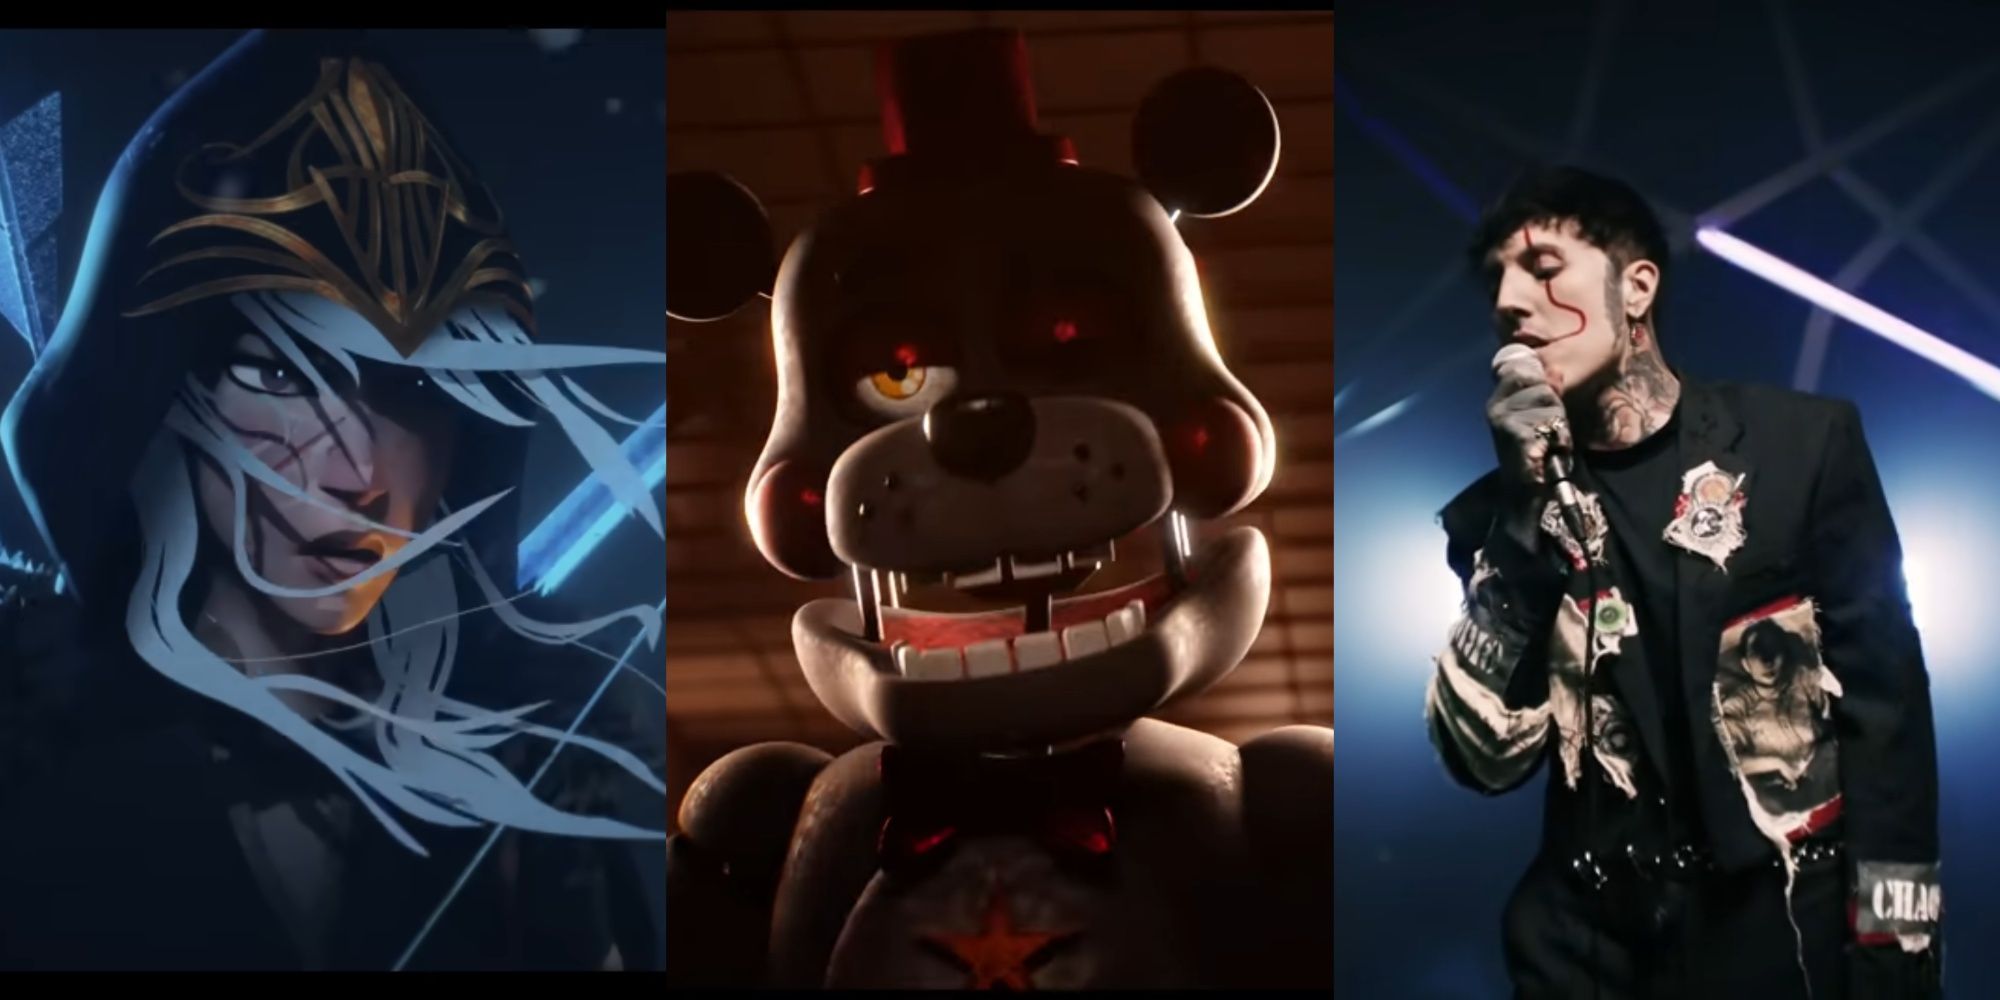 Ashe from League of Legends song Legends Never Die by Against the Current, Freddy Fazbear from Madness by NateWantsToBattle, and Ludens by Bring Me the Horizonreddy F